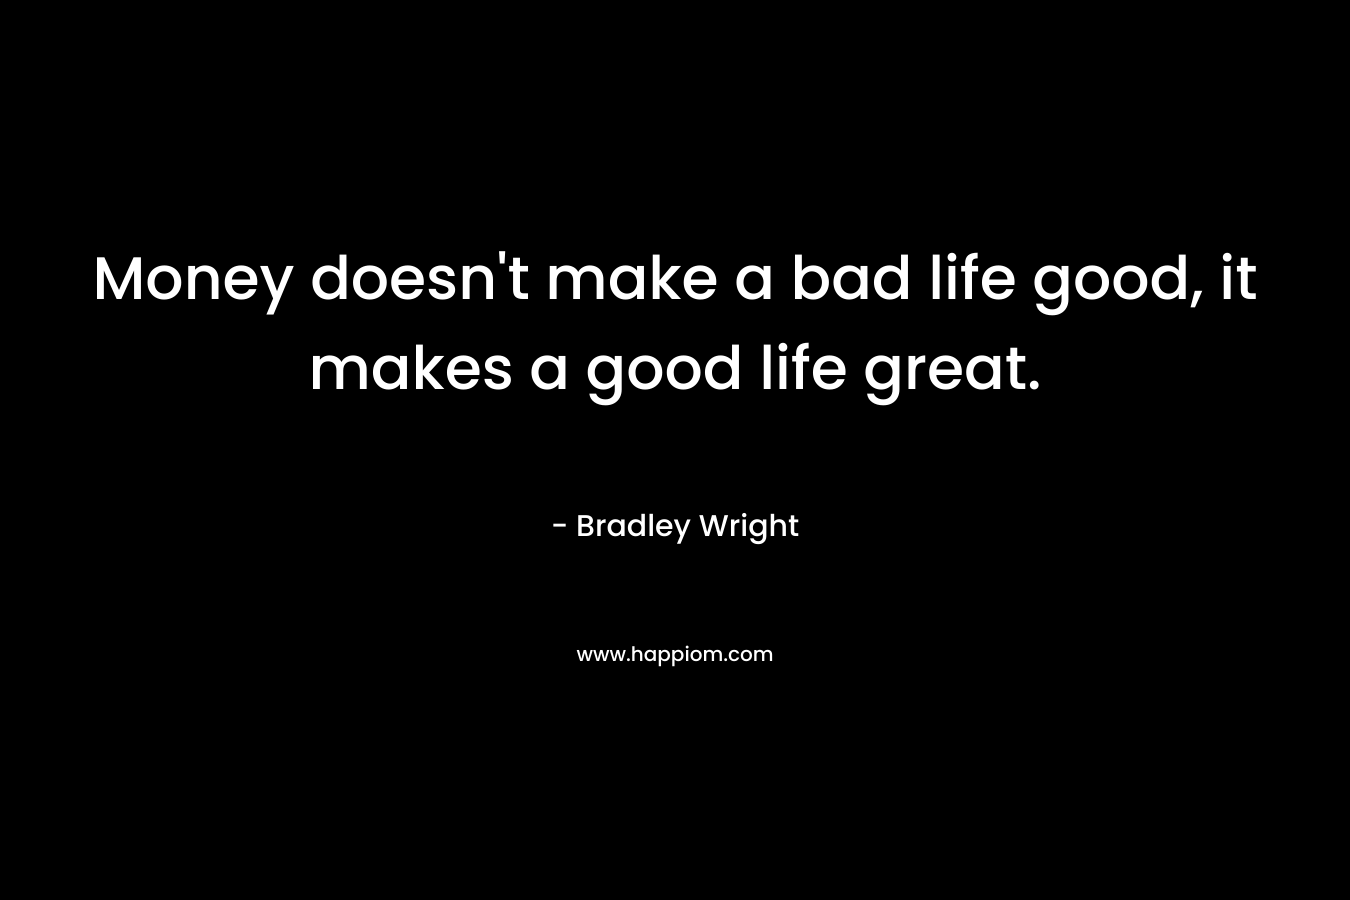 Money doesn't make a bad life good, it makes a good life great.